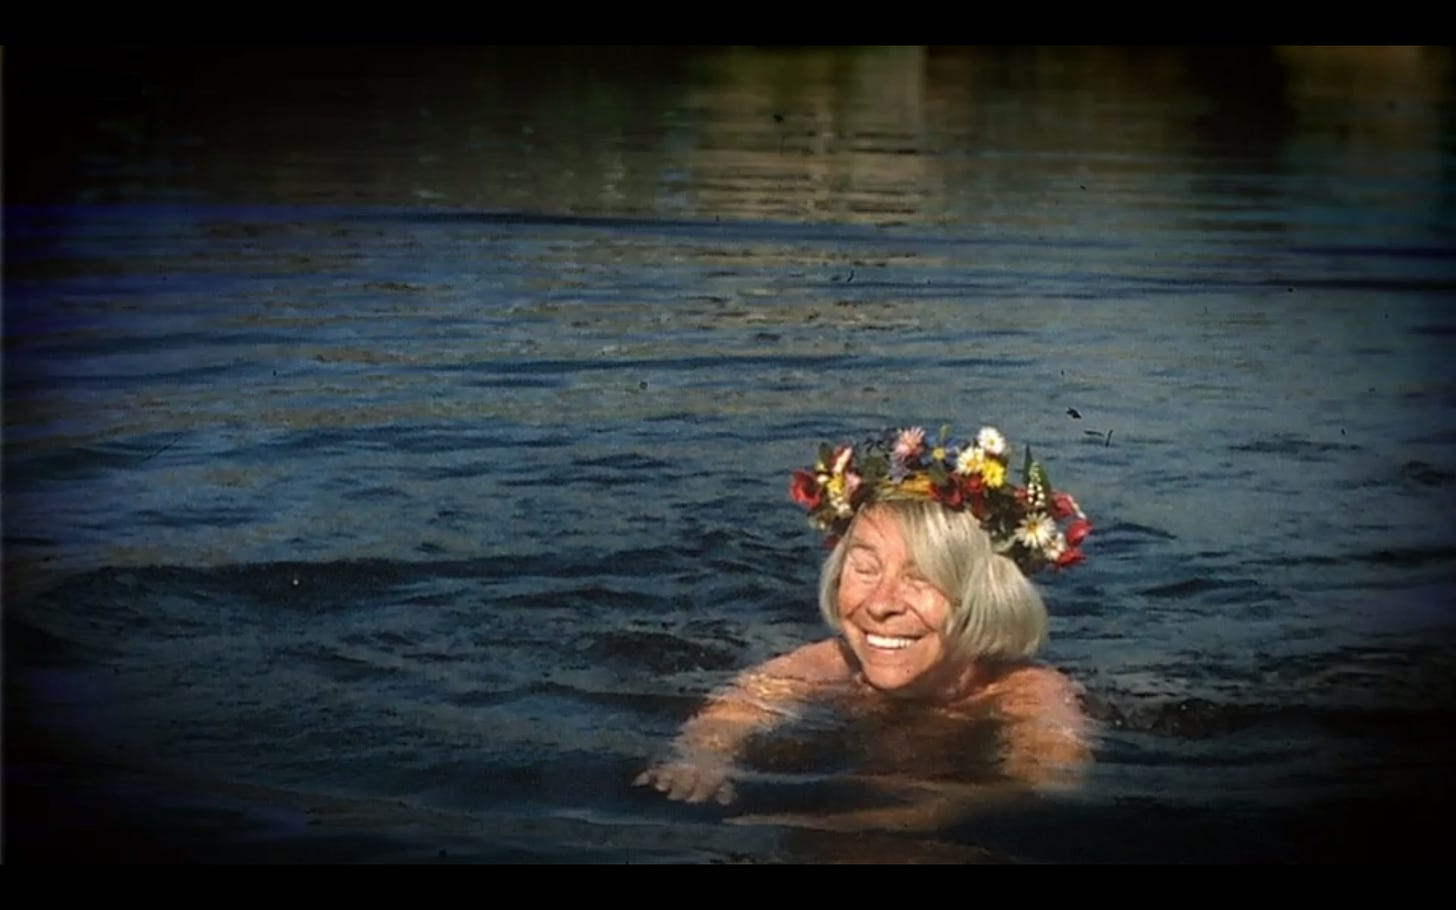 An older white woman with straight grey hair in a bob style with a crown of flowers, swims naked with a big smile on her face in a dark lake.